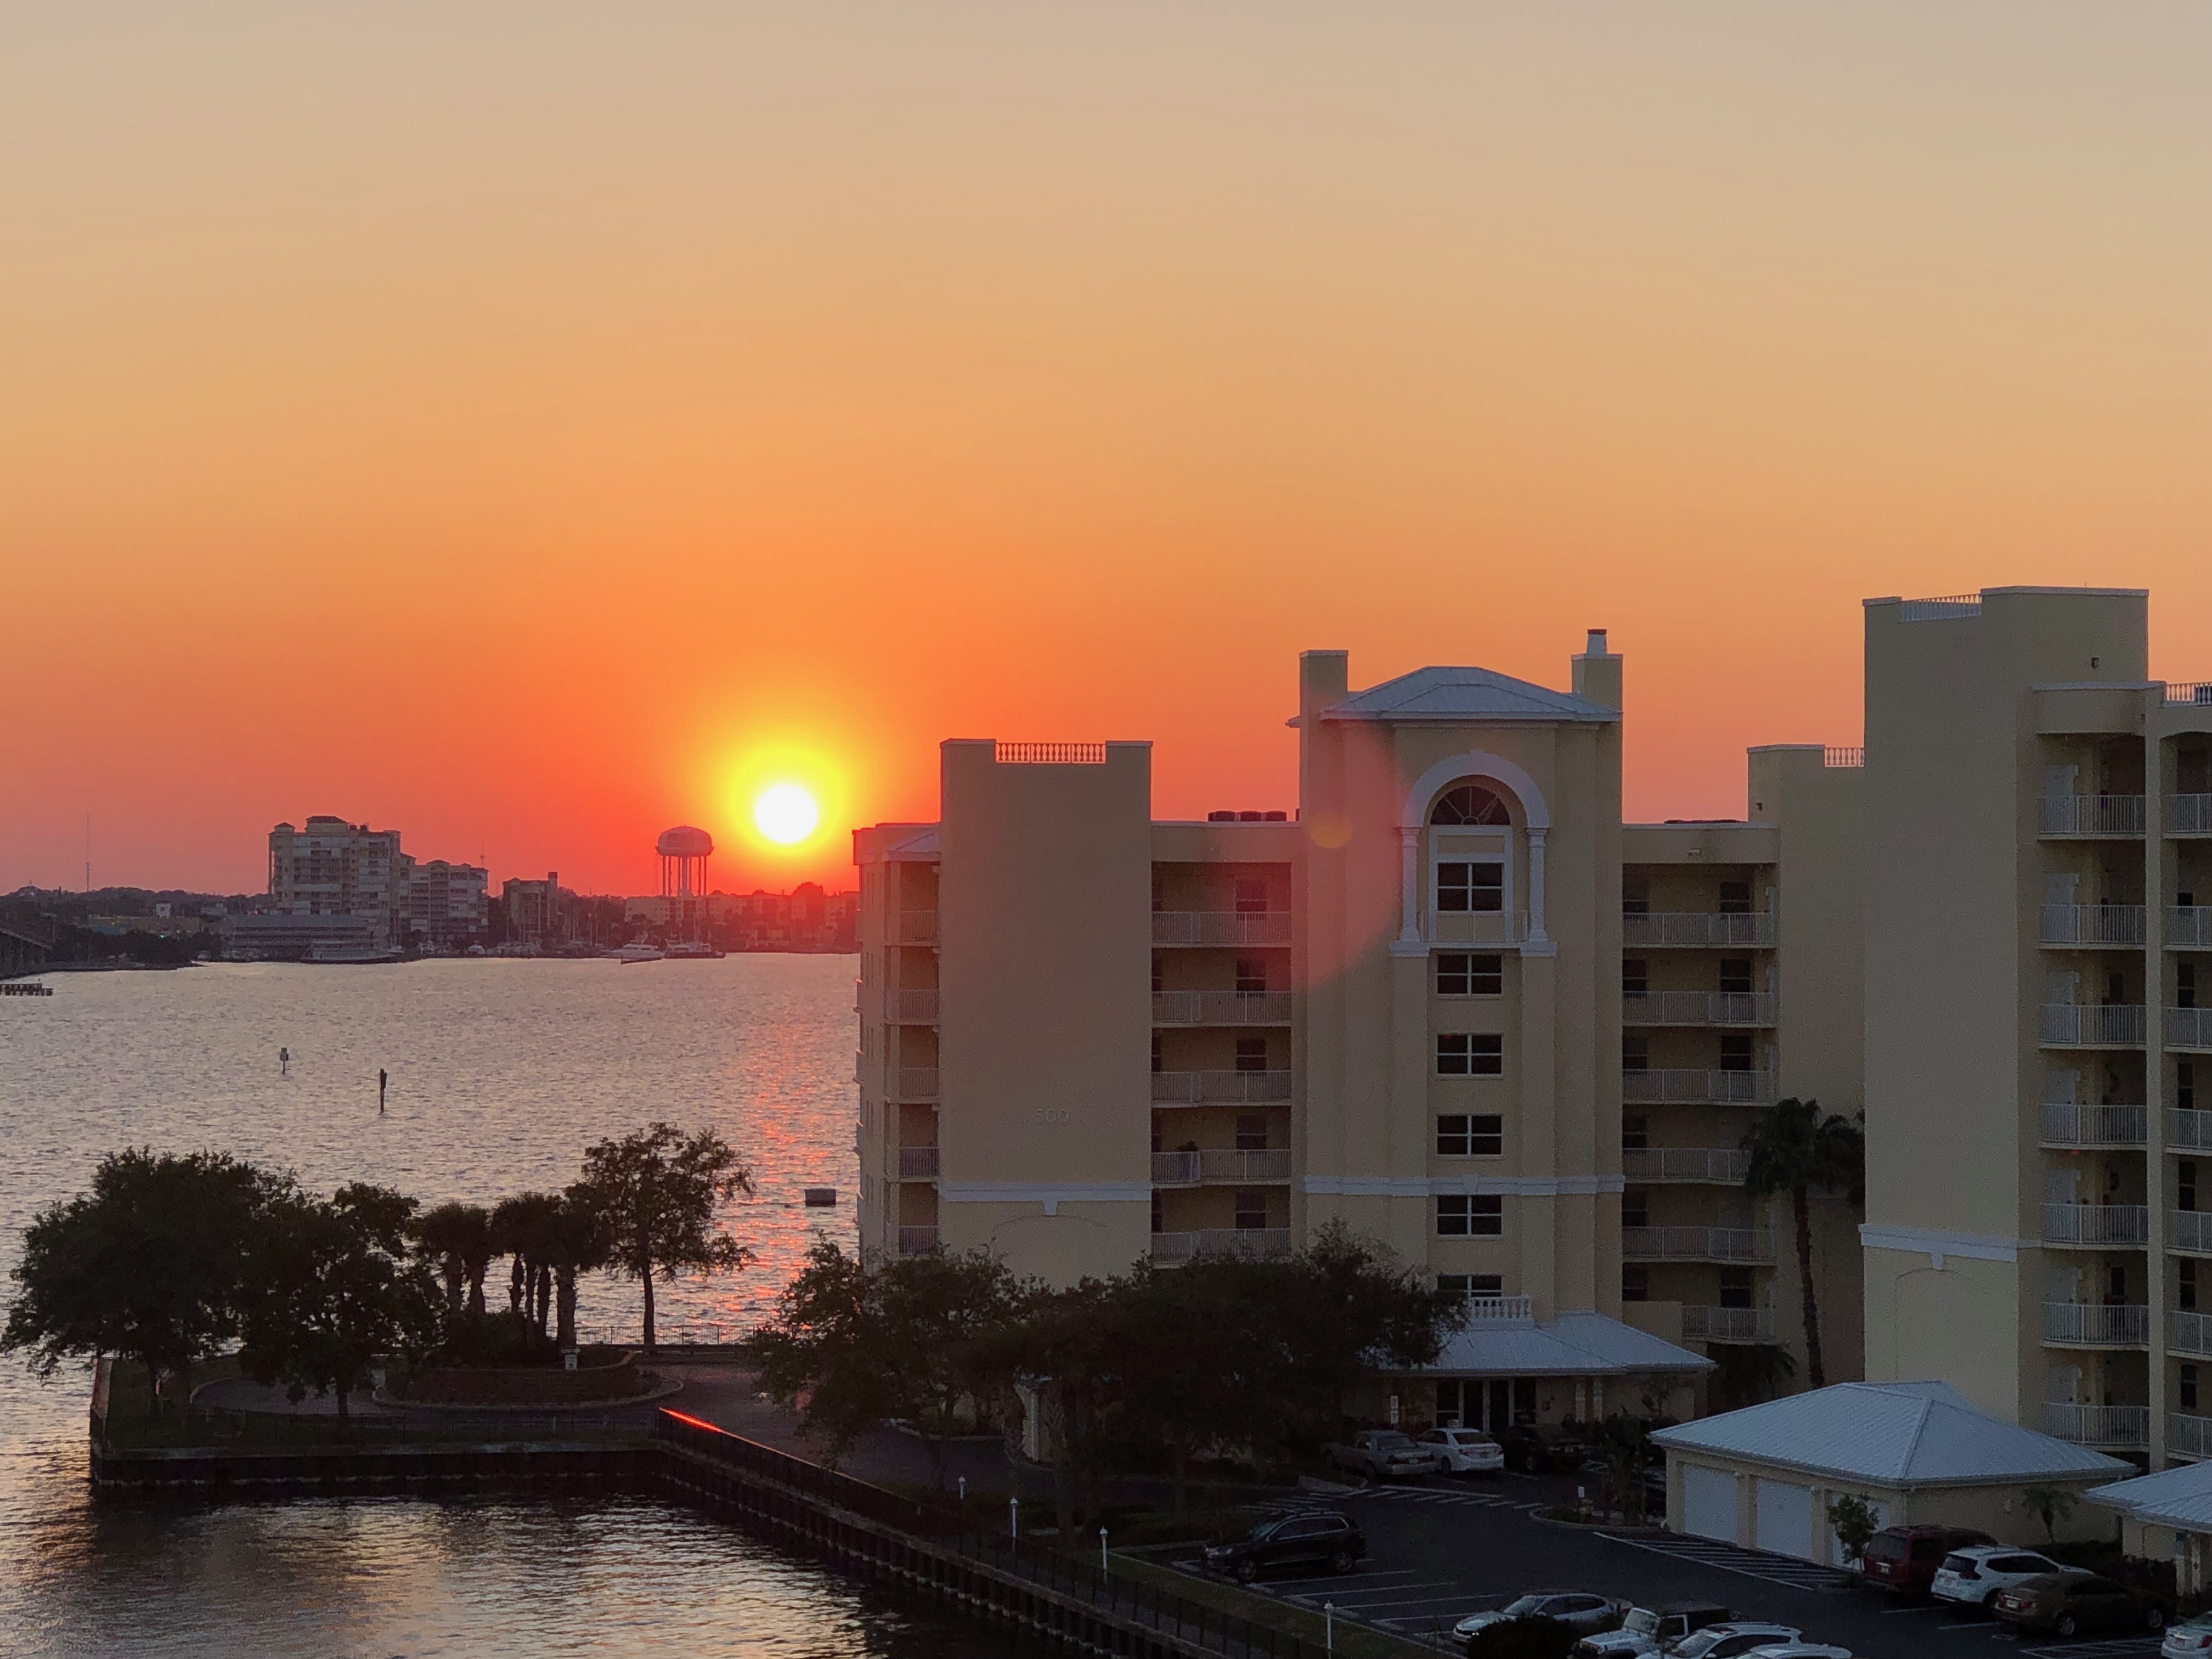 Sunset Over Indian River taken by 134 resident SS (iPhone X)